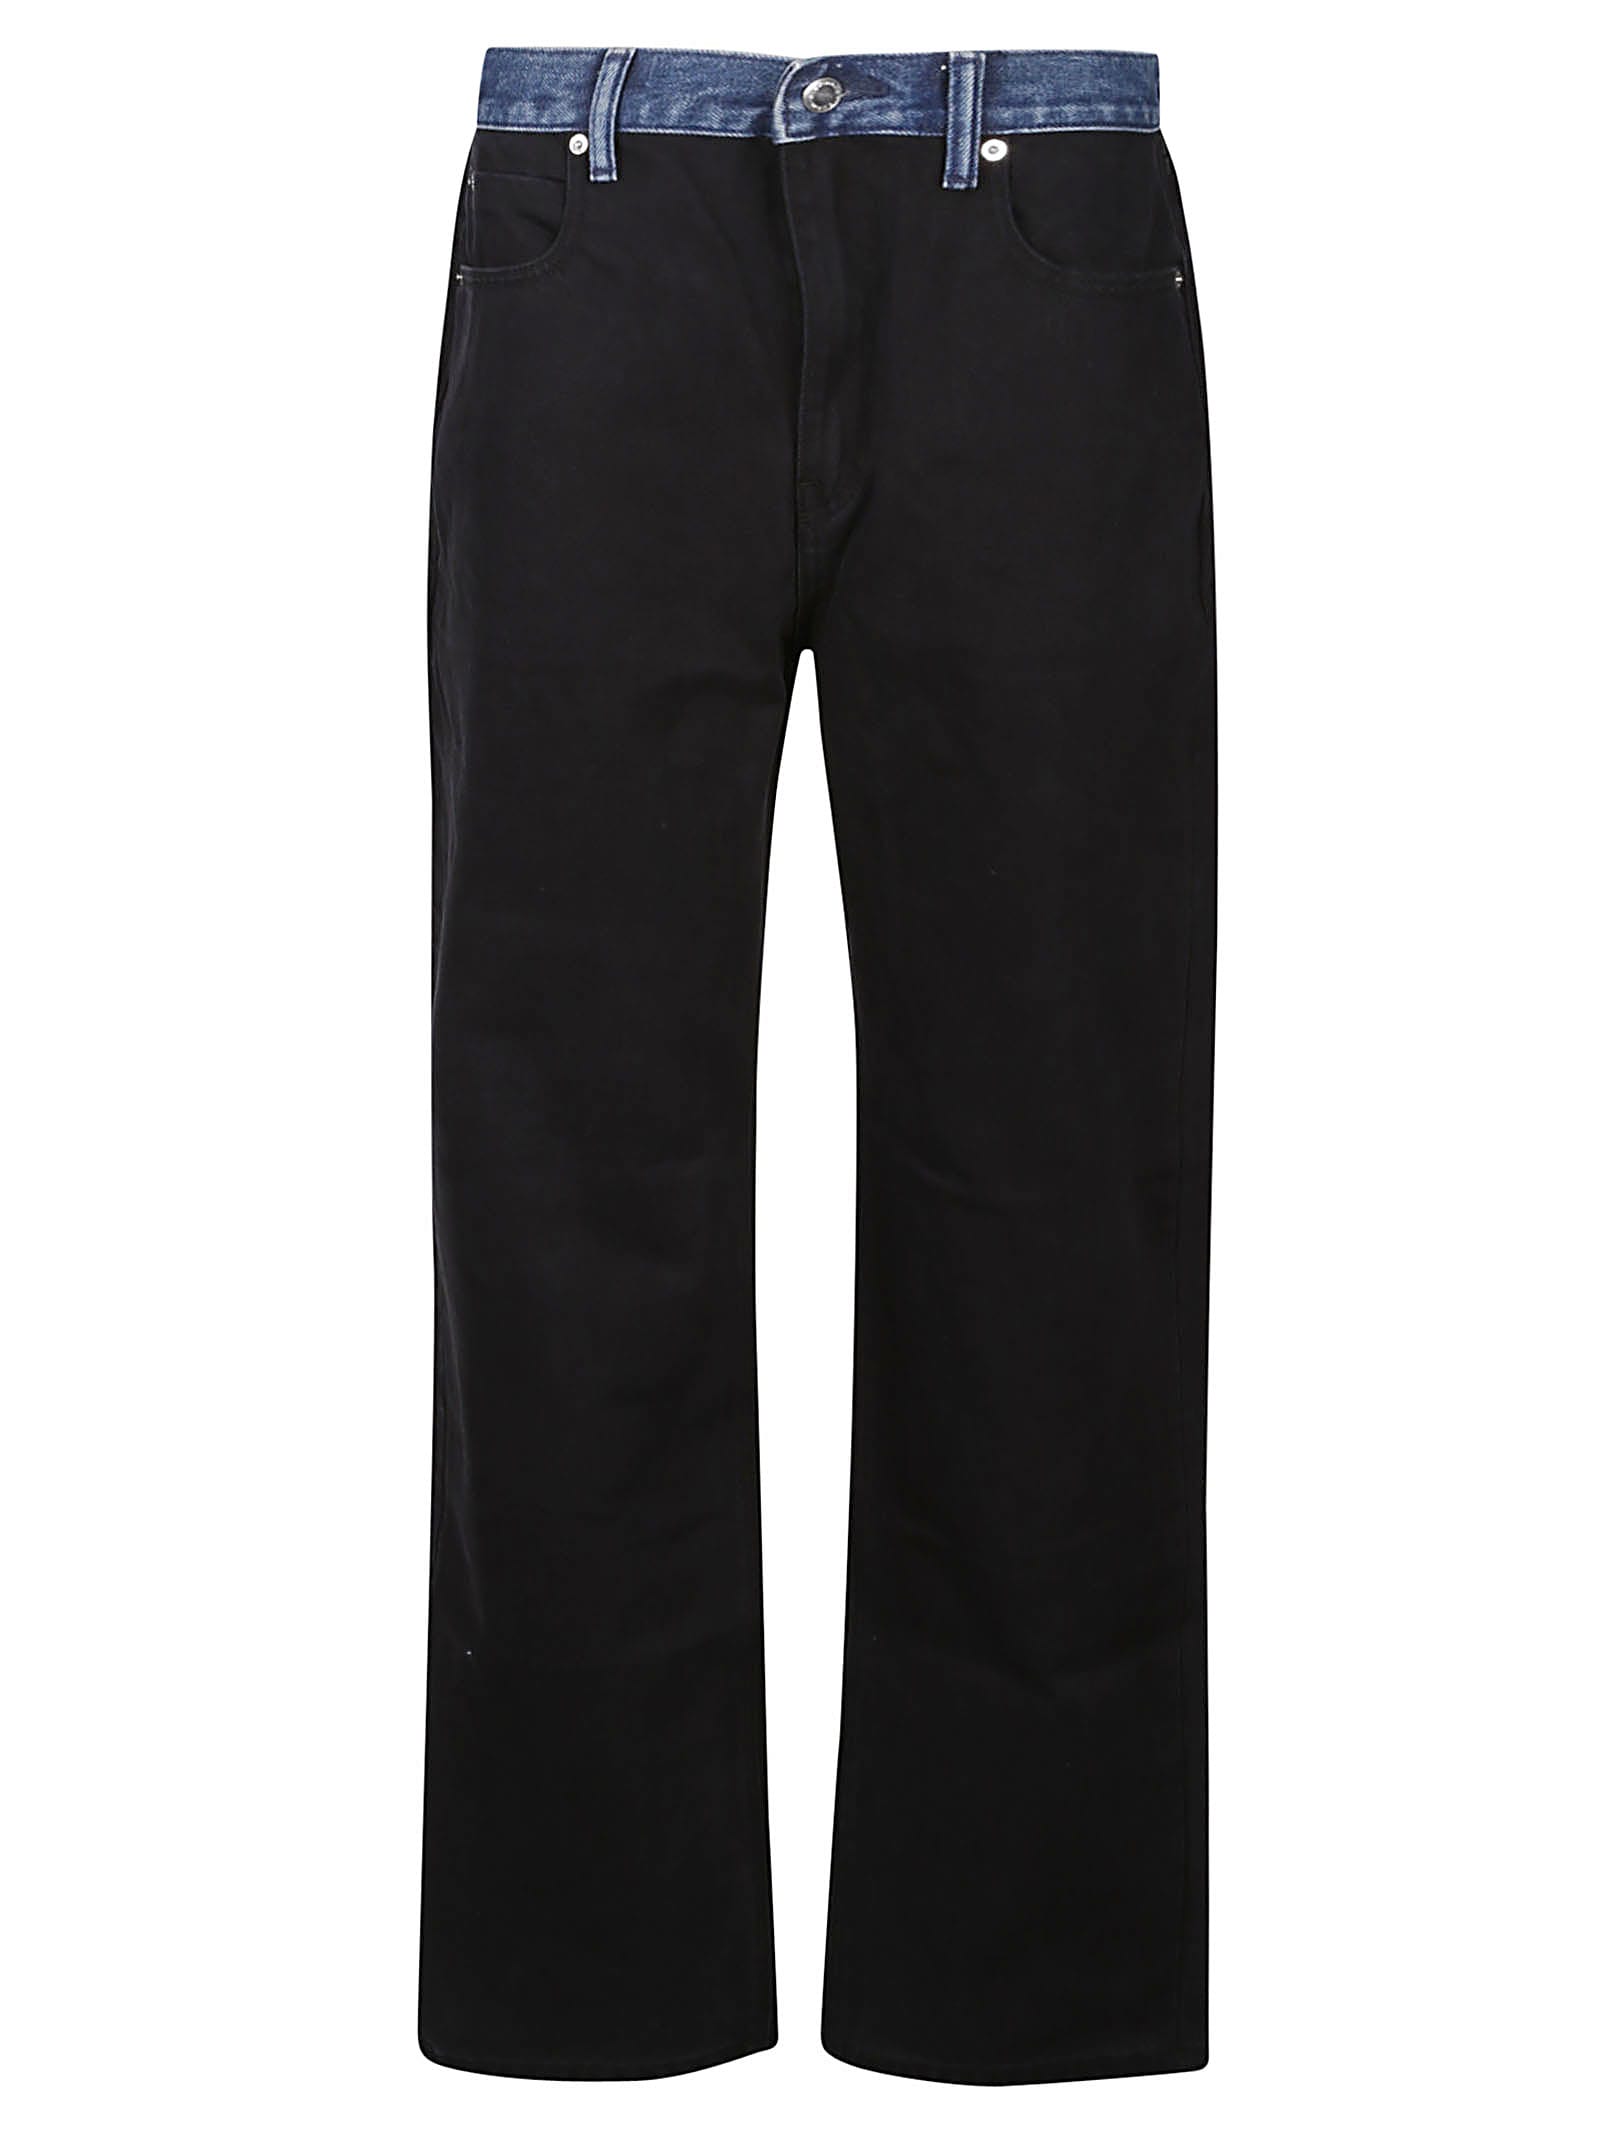 ALEXANDER WANG CONTRAST WAISTBAND MID RISE RELAXED STRAIGHT JEANS